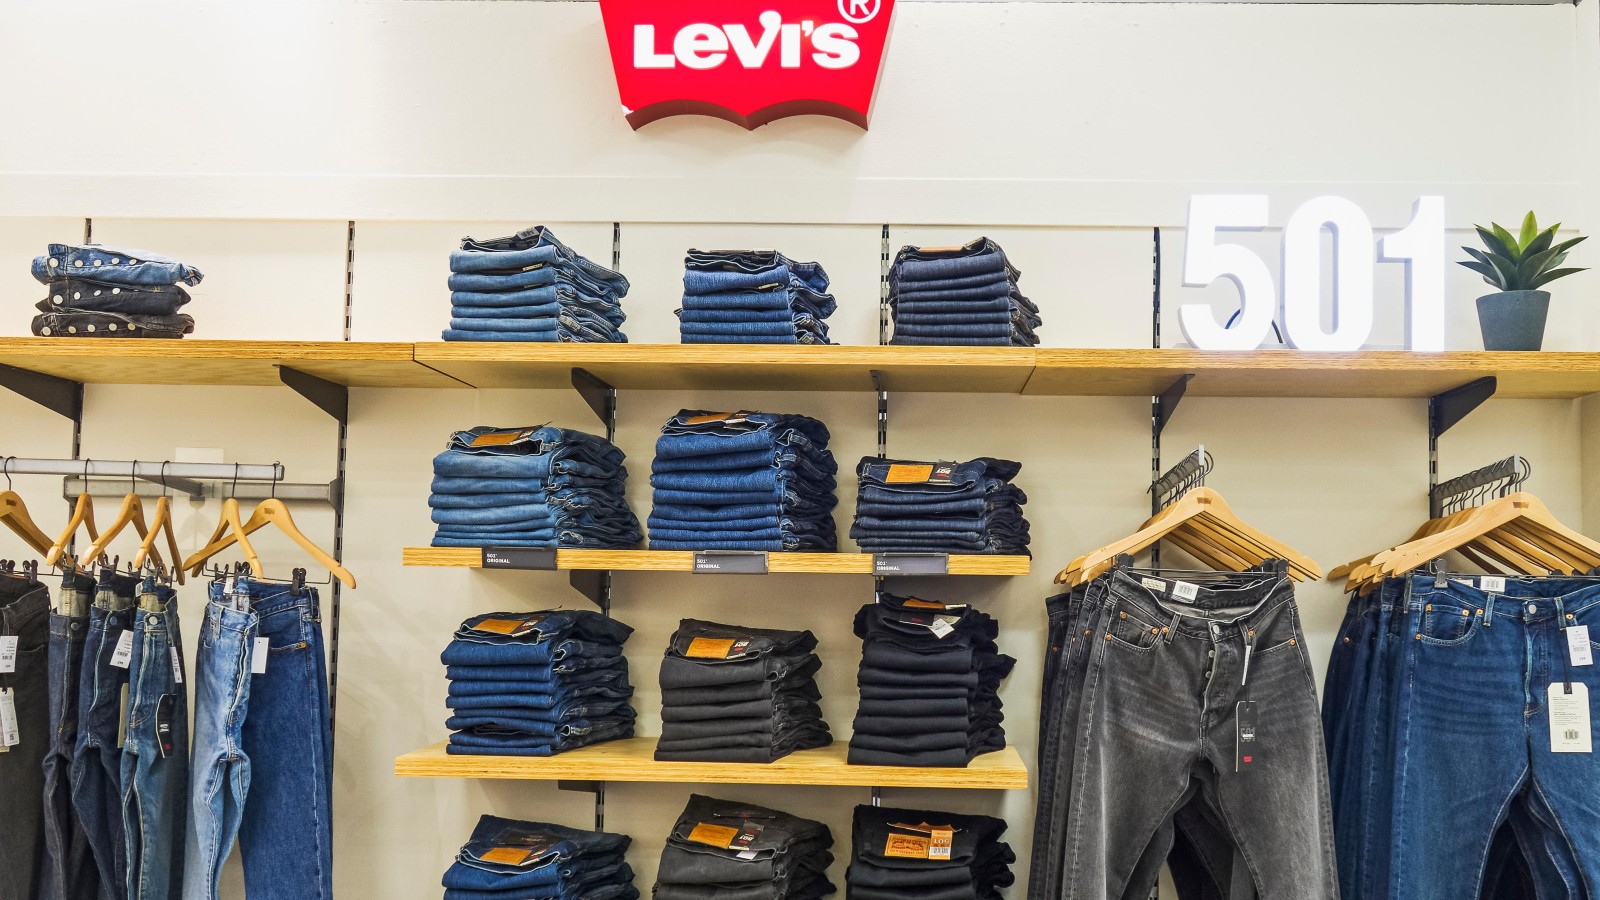 Black Friday clothing deals on Levi's jeans - up to 50% off EVERYTHING! |  GoodTo